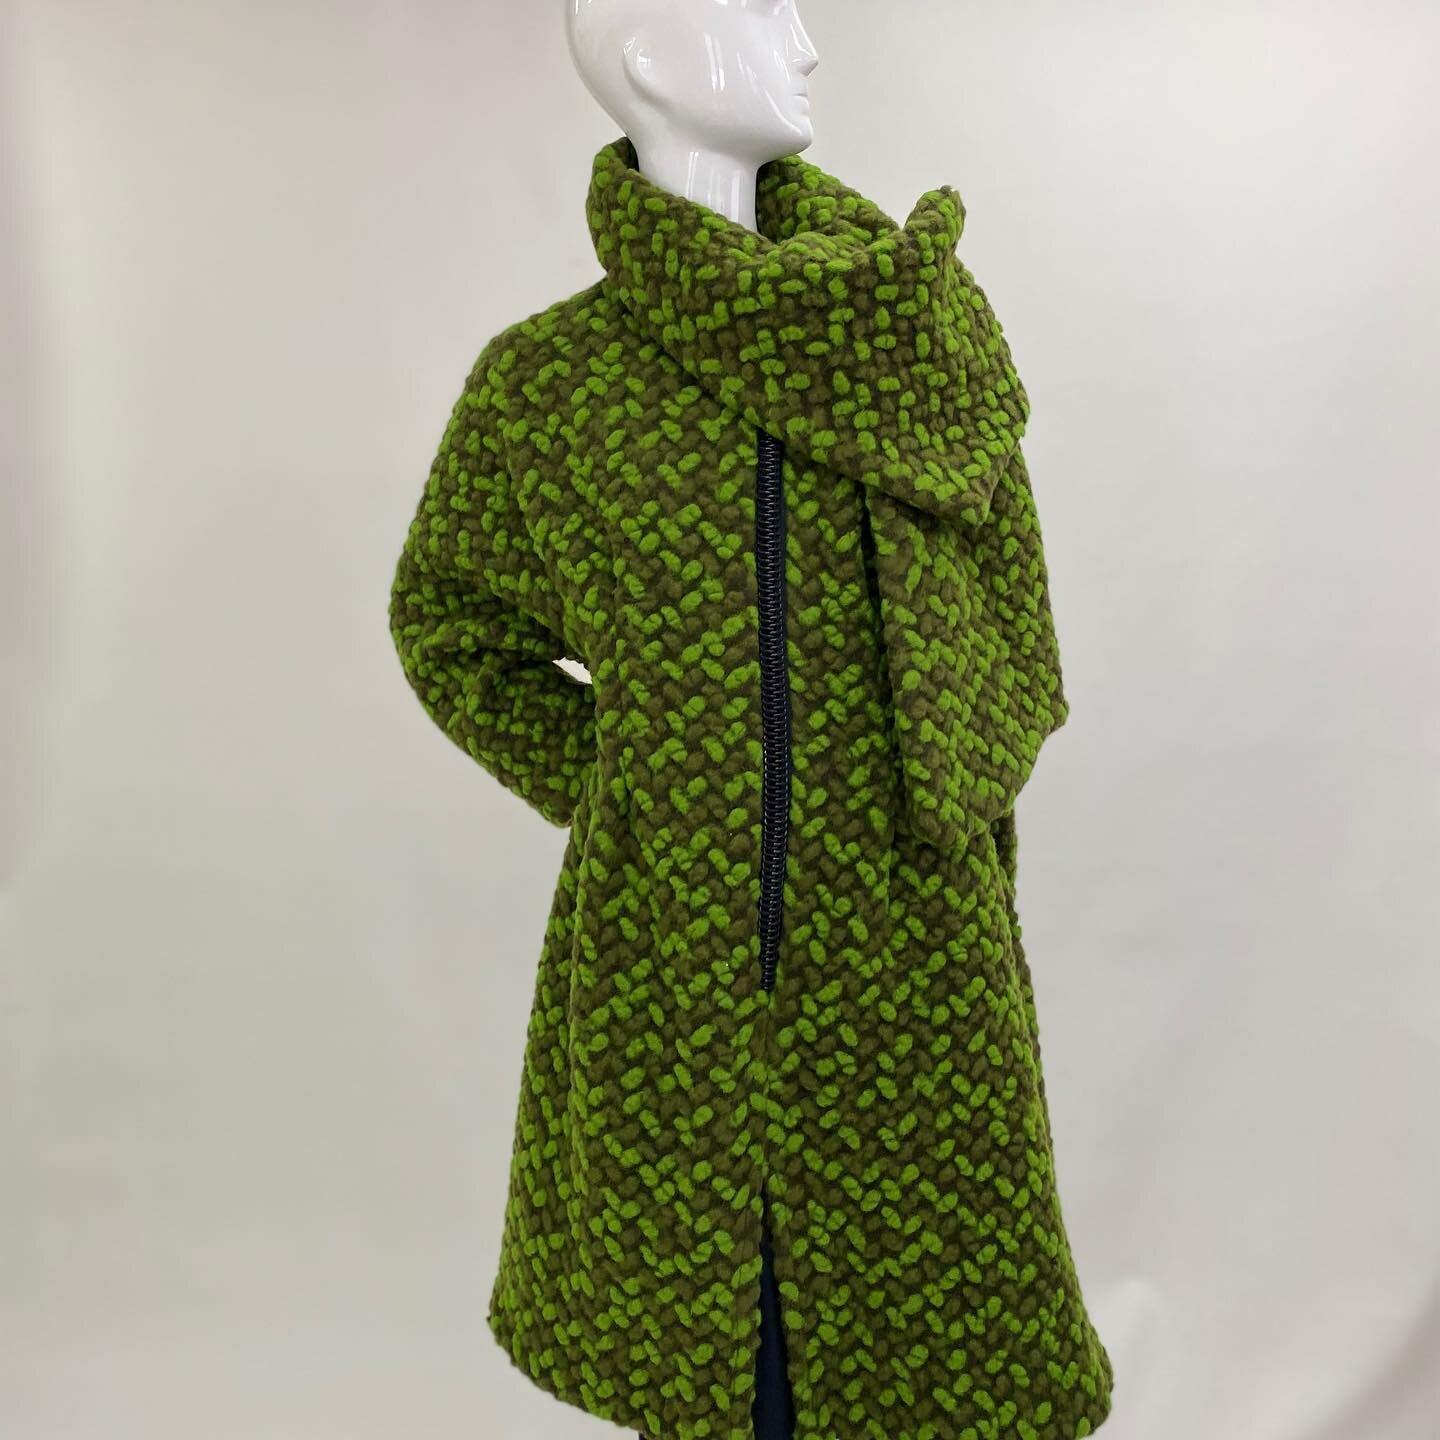 Or...maybe you want in a green!One of a kind,imported wool coat,fits sizes S-XL,oversized zipper!
#greencoat #woolcoats #outerwear #winterwear #oneofakind #fashionover50 #modernwoman #madeindetroit #minimalfashion